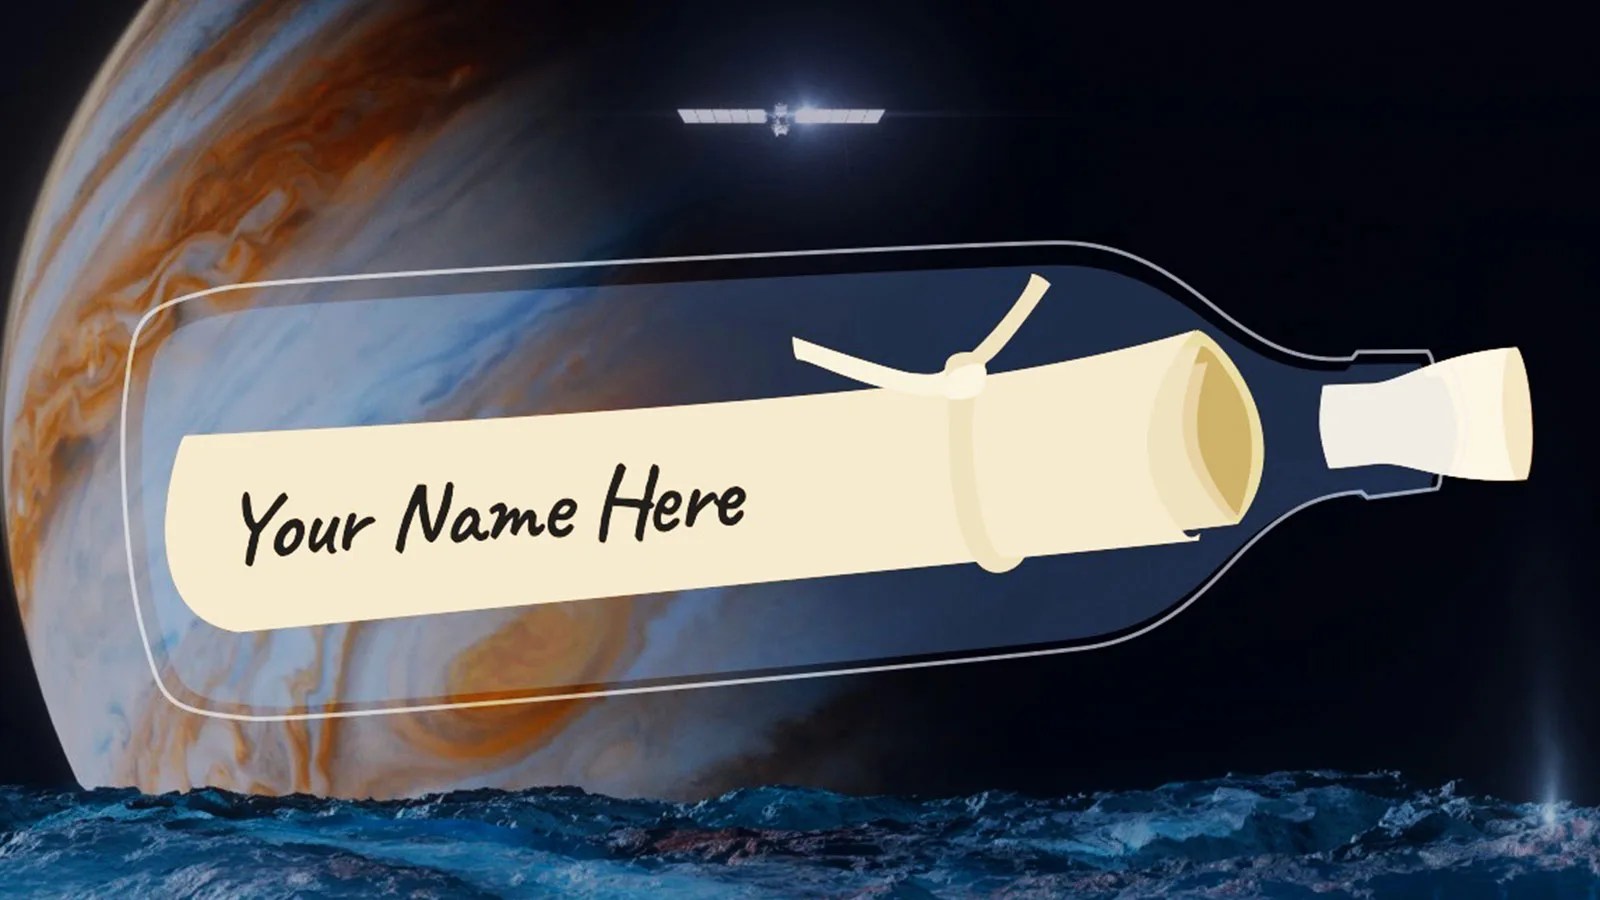 An illustration of a giant bottle with a message inside. The bottle is in front of Jupiter with Europa's ocean below it. The Europa Clipper spacecraft is up over the bottle.